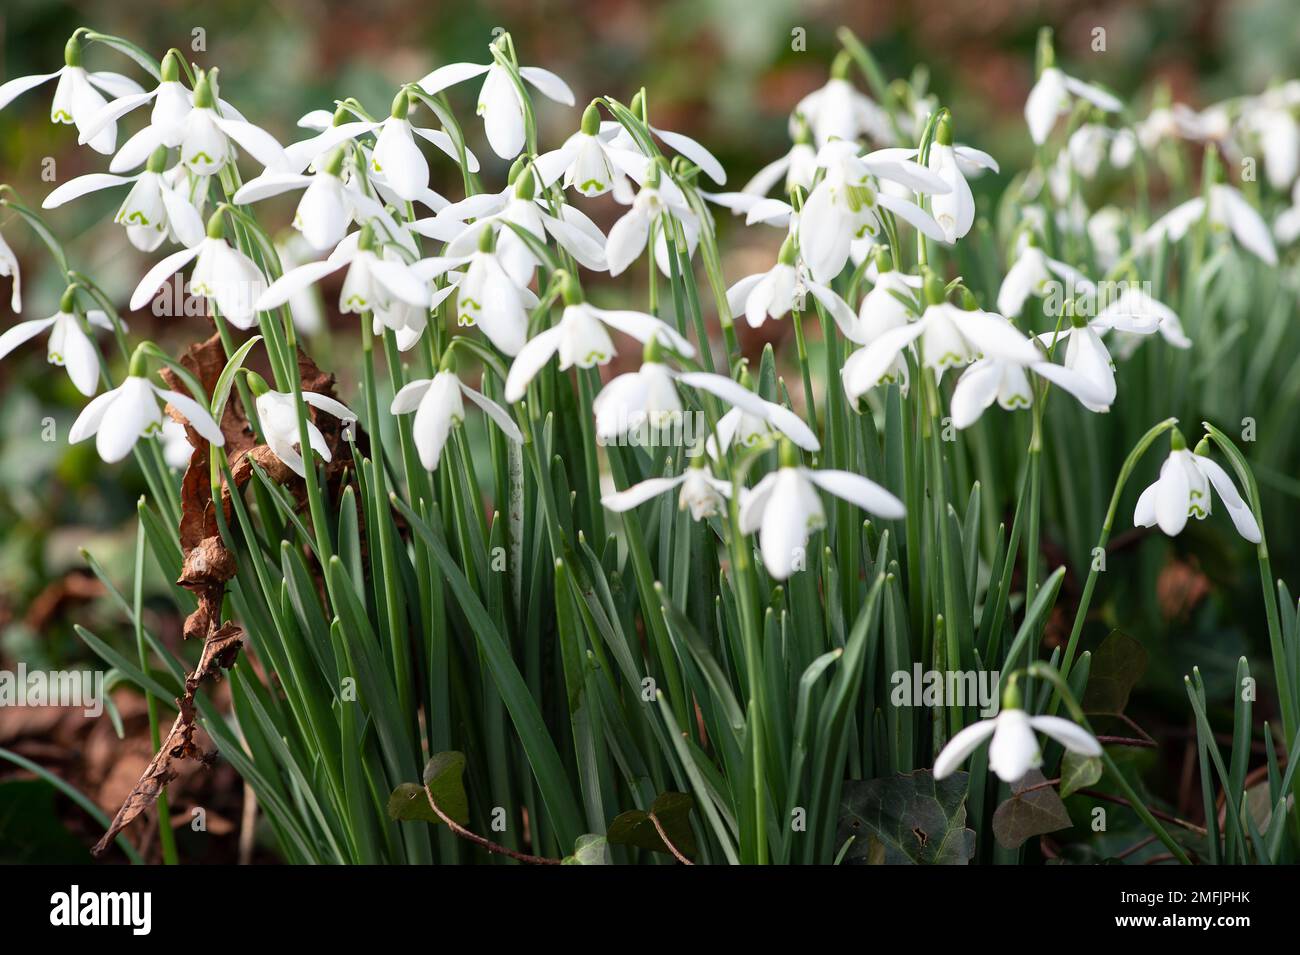 Dorney, Buckinghamshire, UK. 9th February, 2022. Galanthus, pretty snowdrops scatter a woodland in Dorney, Buckinghamshire. There are around 20 known species of snowdrops in Europe. Credit: Maureen McLean/Alamy Stock Photo